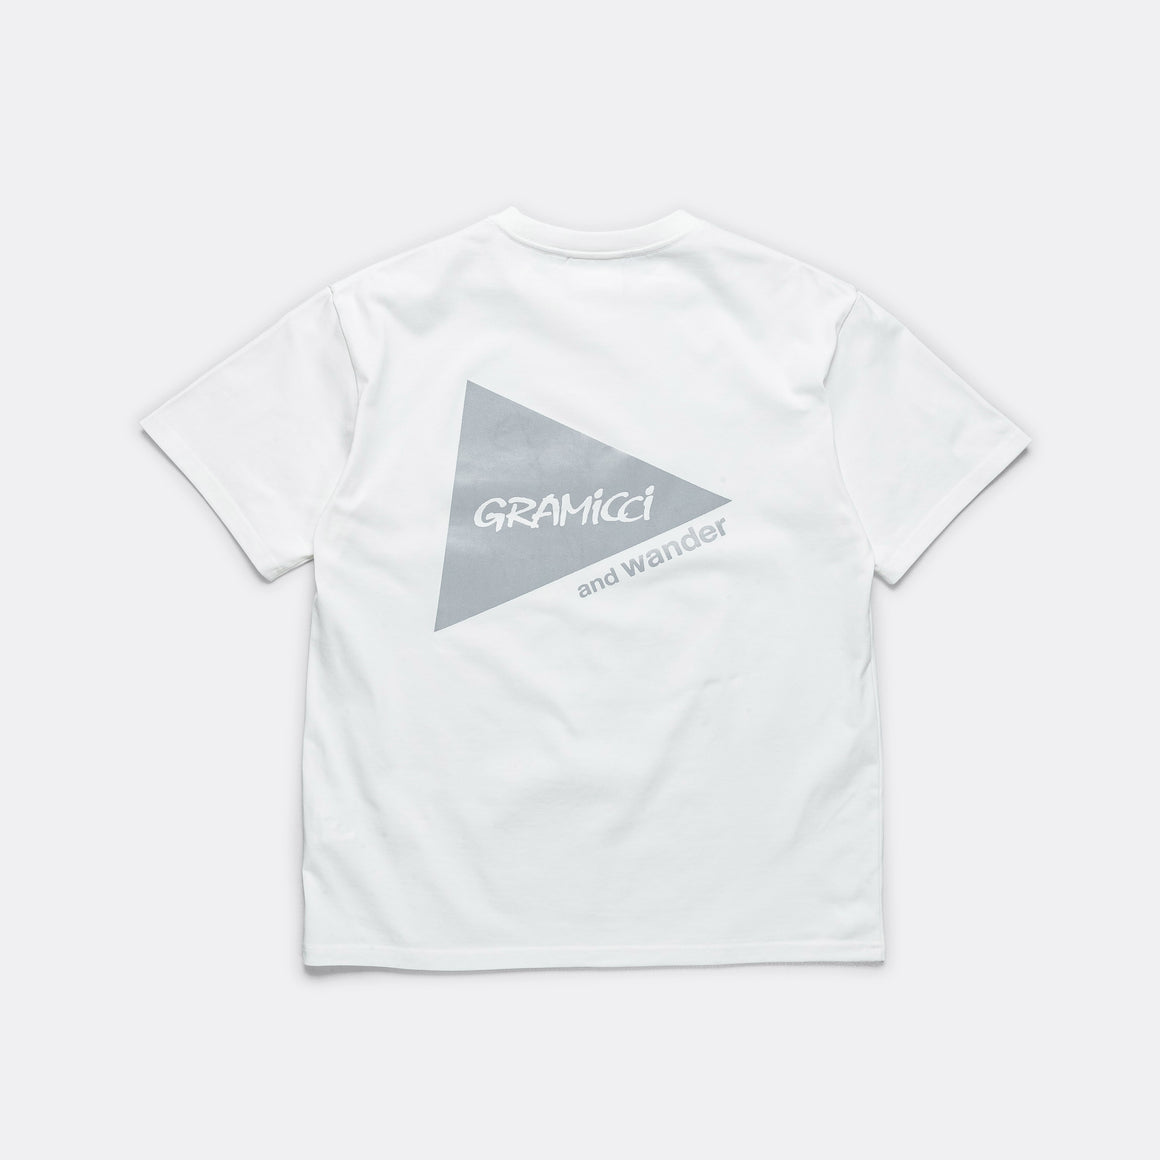 Gramicci - Backprint Tee × and wander - White - UP THERE